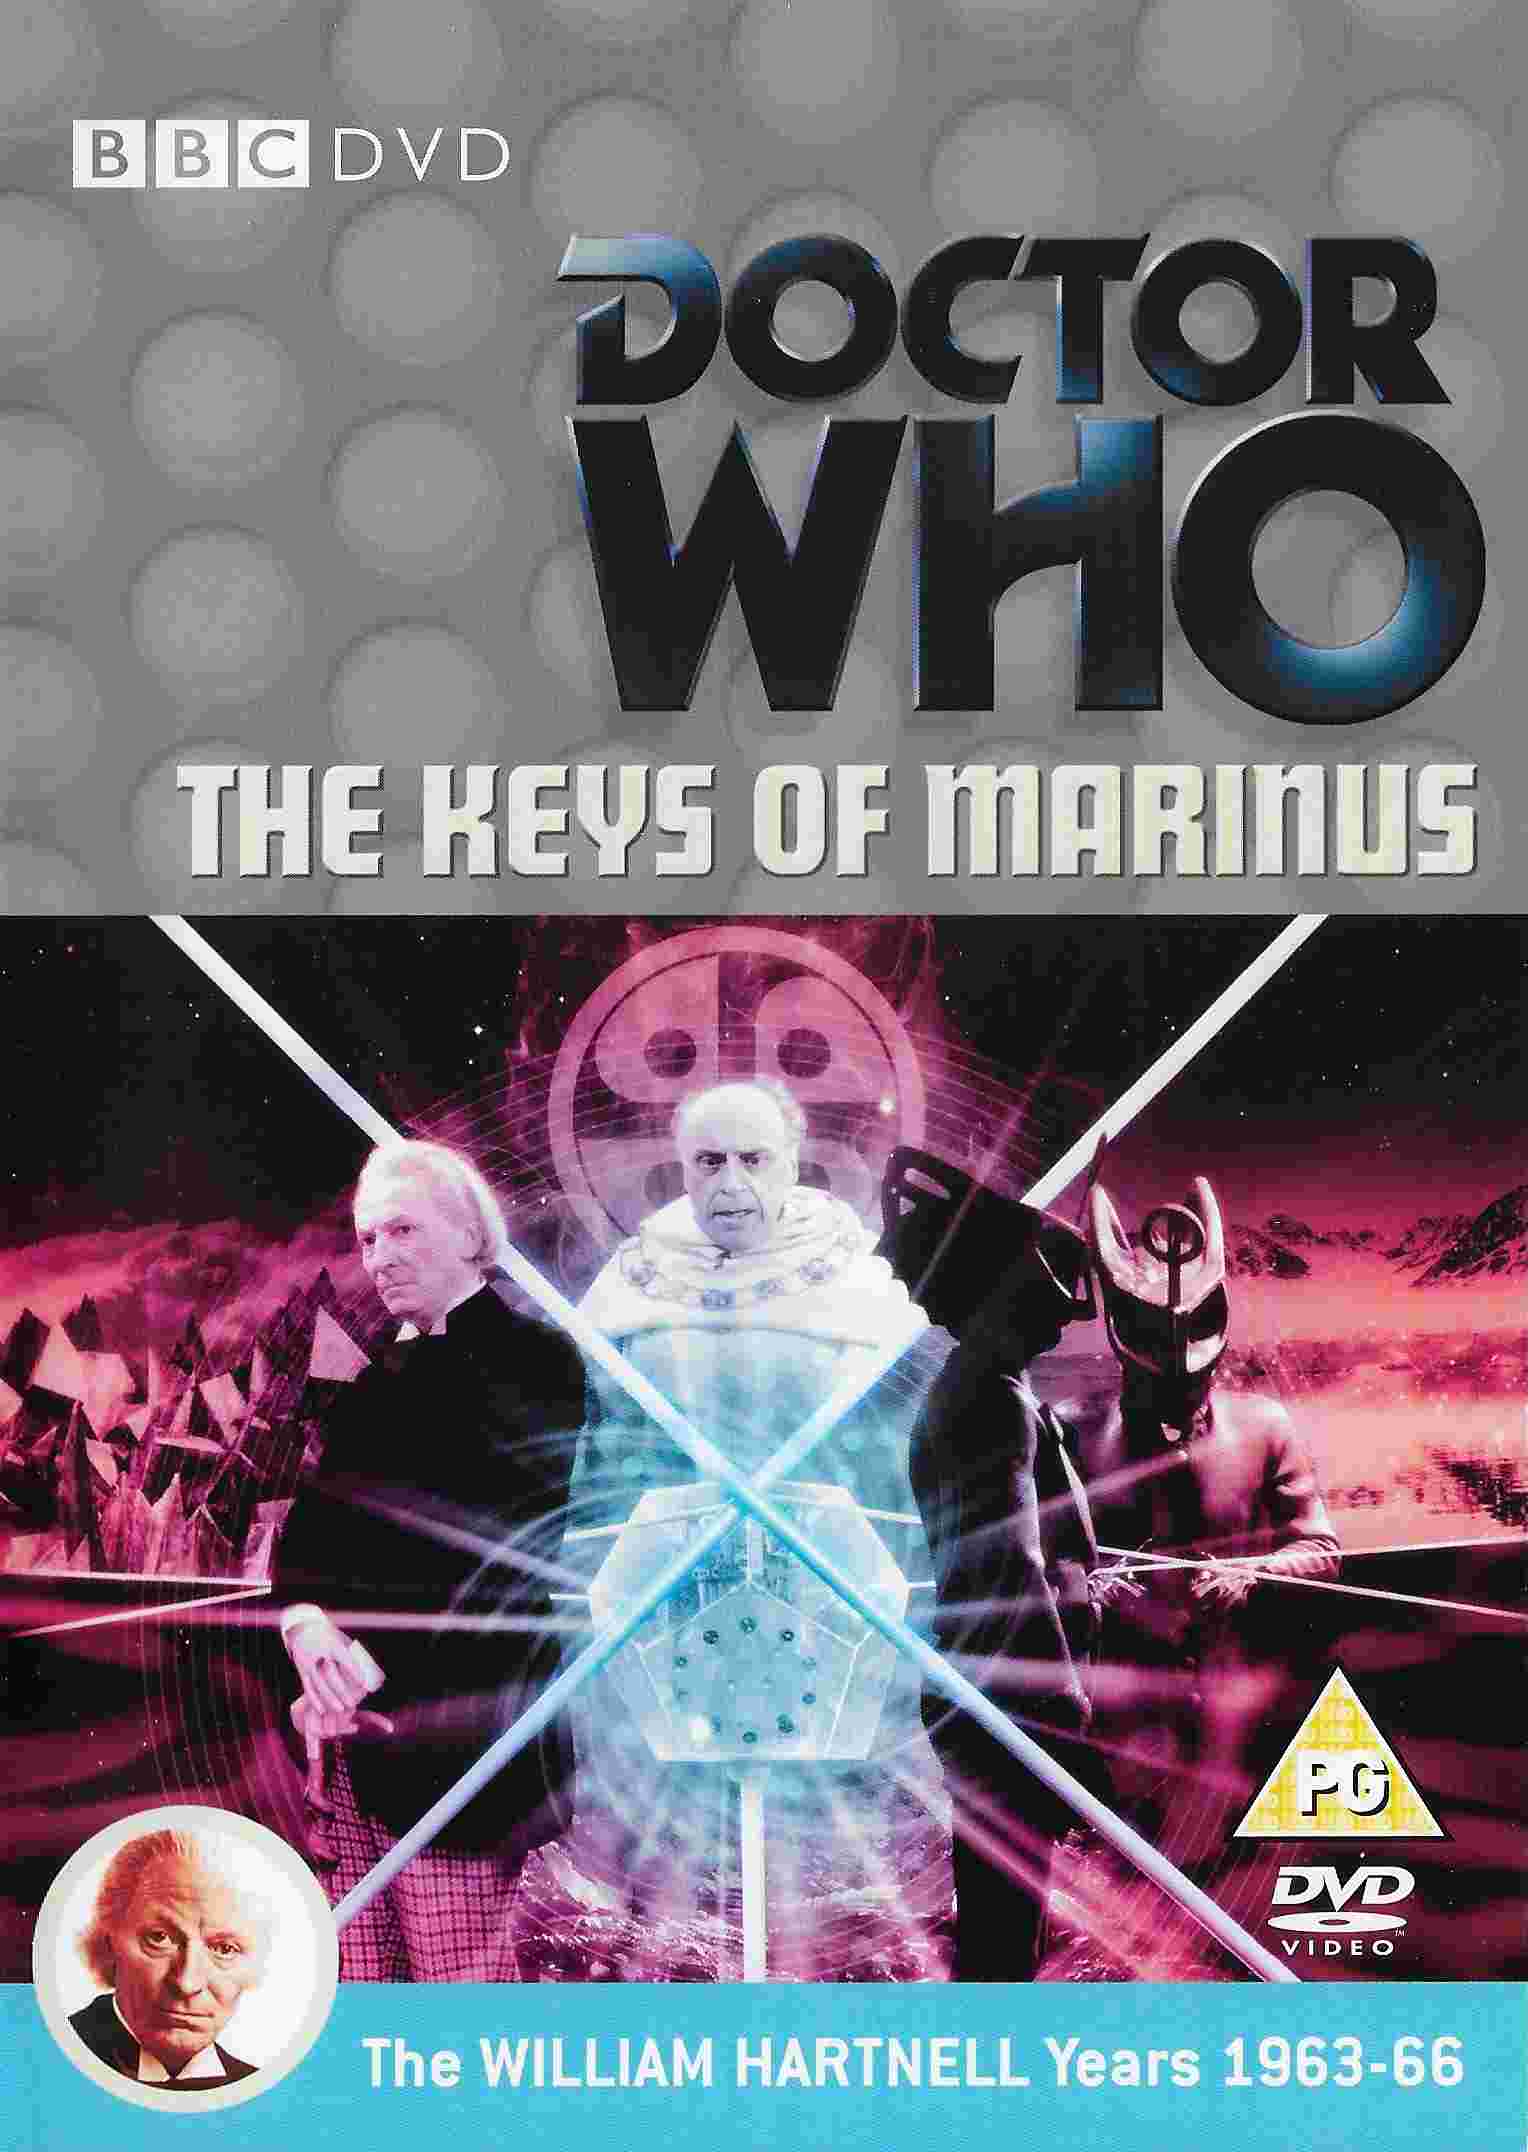 Picture of BBCDVD 2616 Doctor Who - The Keys of Marinus by artist Terry Nation from the BBC records and Tapes library